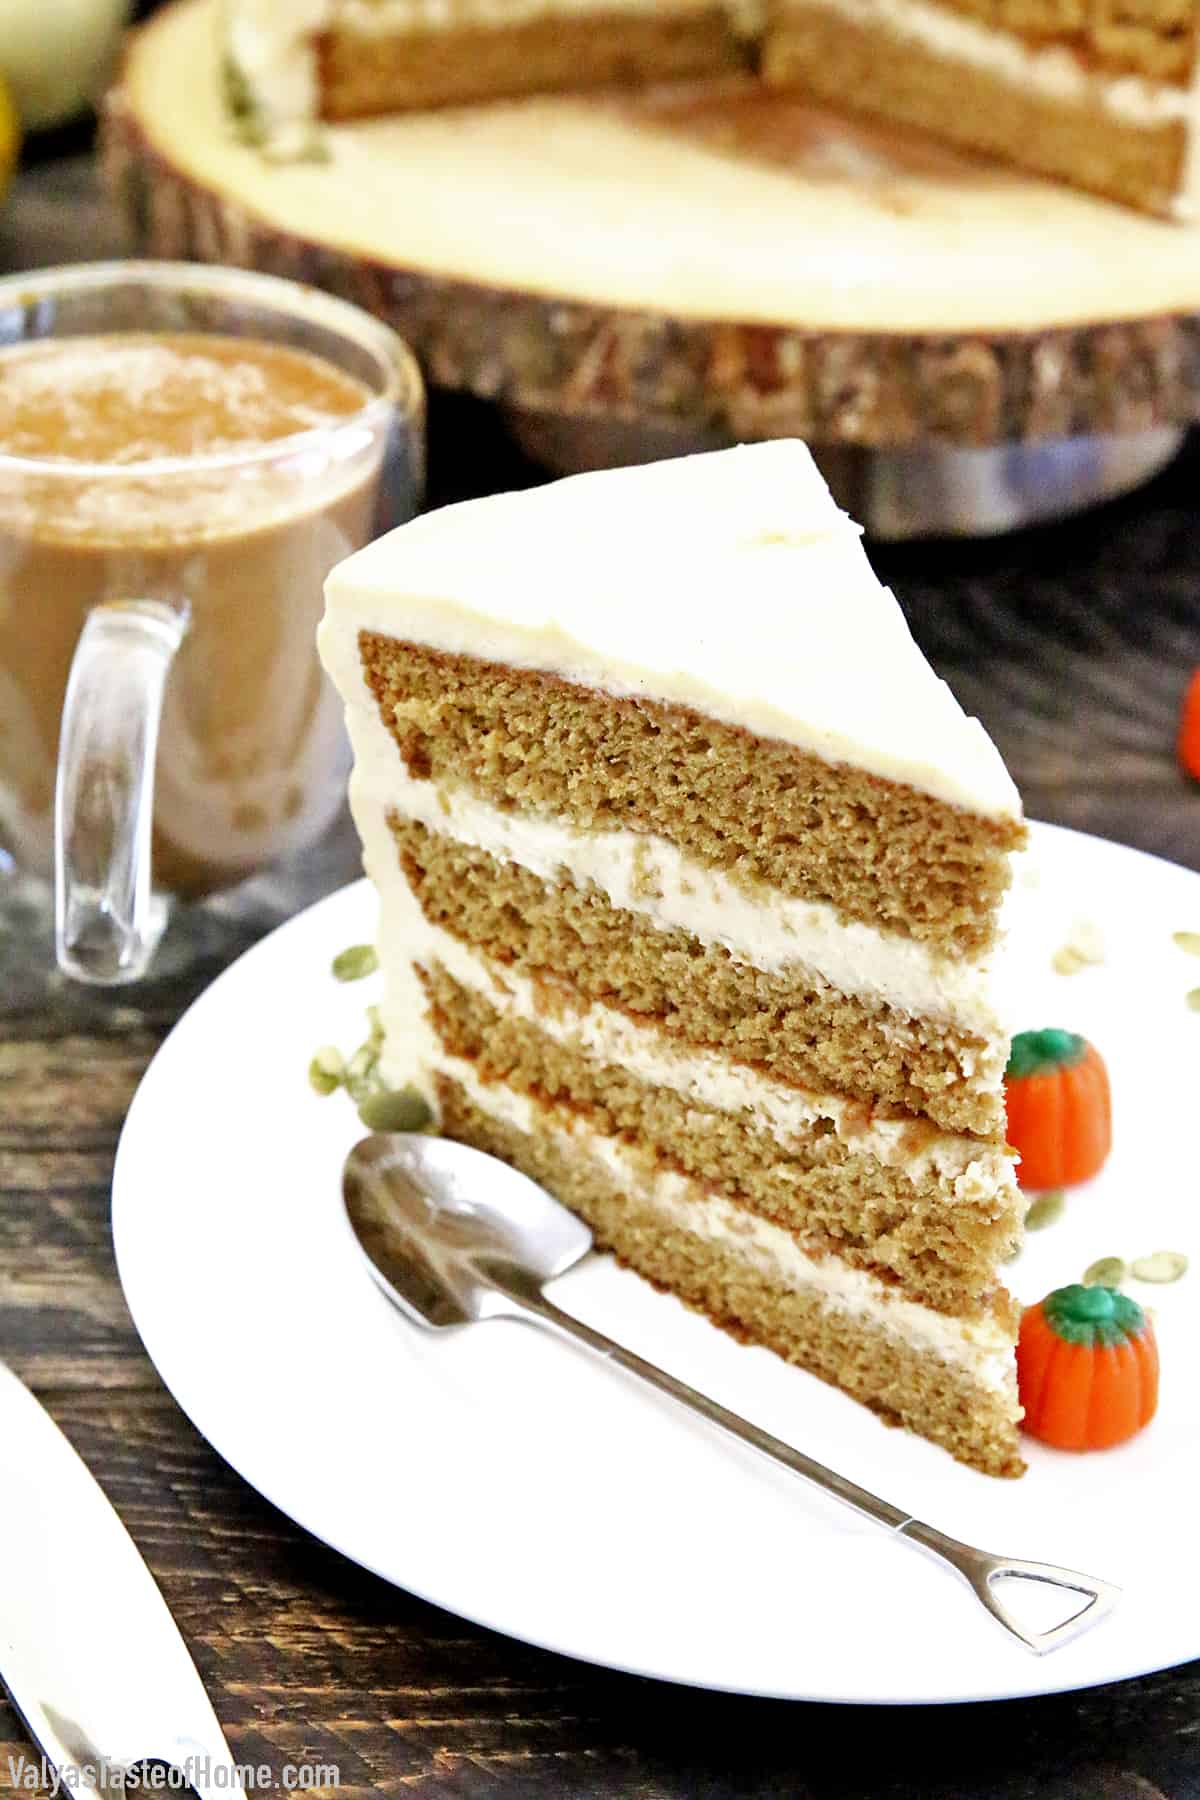 It is coffee. It is pumpkin. It is cake. All in one neat and delicious package! The sponge cake is tender and pillowy soft. Light, airy, moist, bursting with all the cravealbe Fall flavors: creamy pumpkin spice and coffee